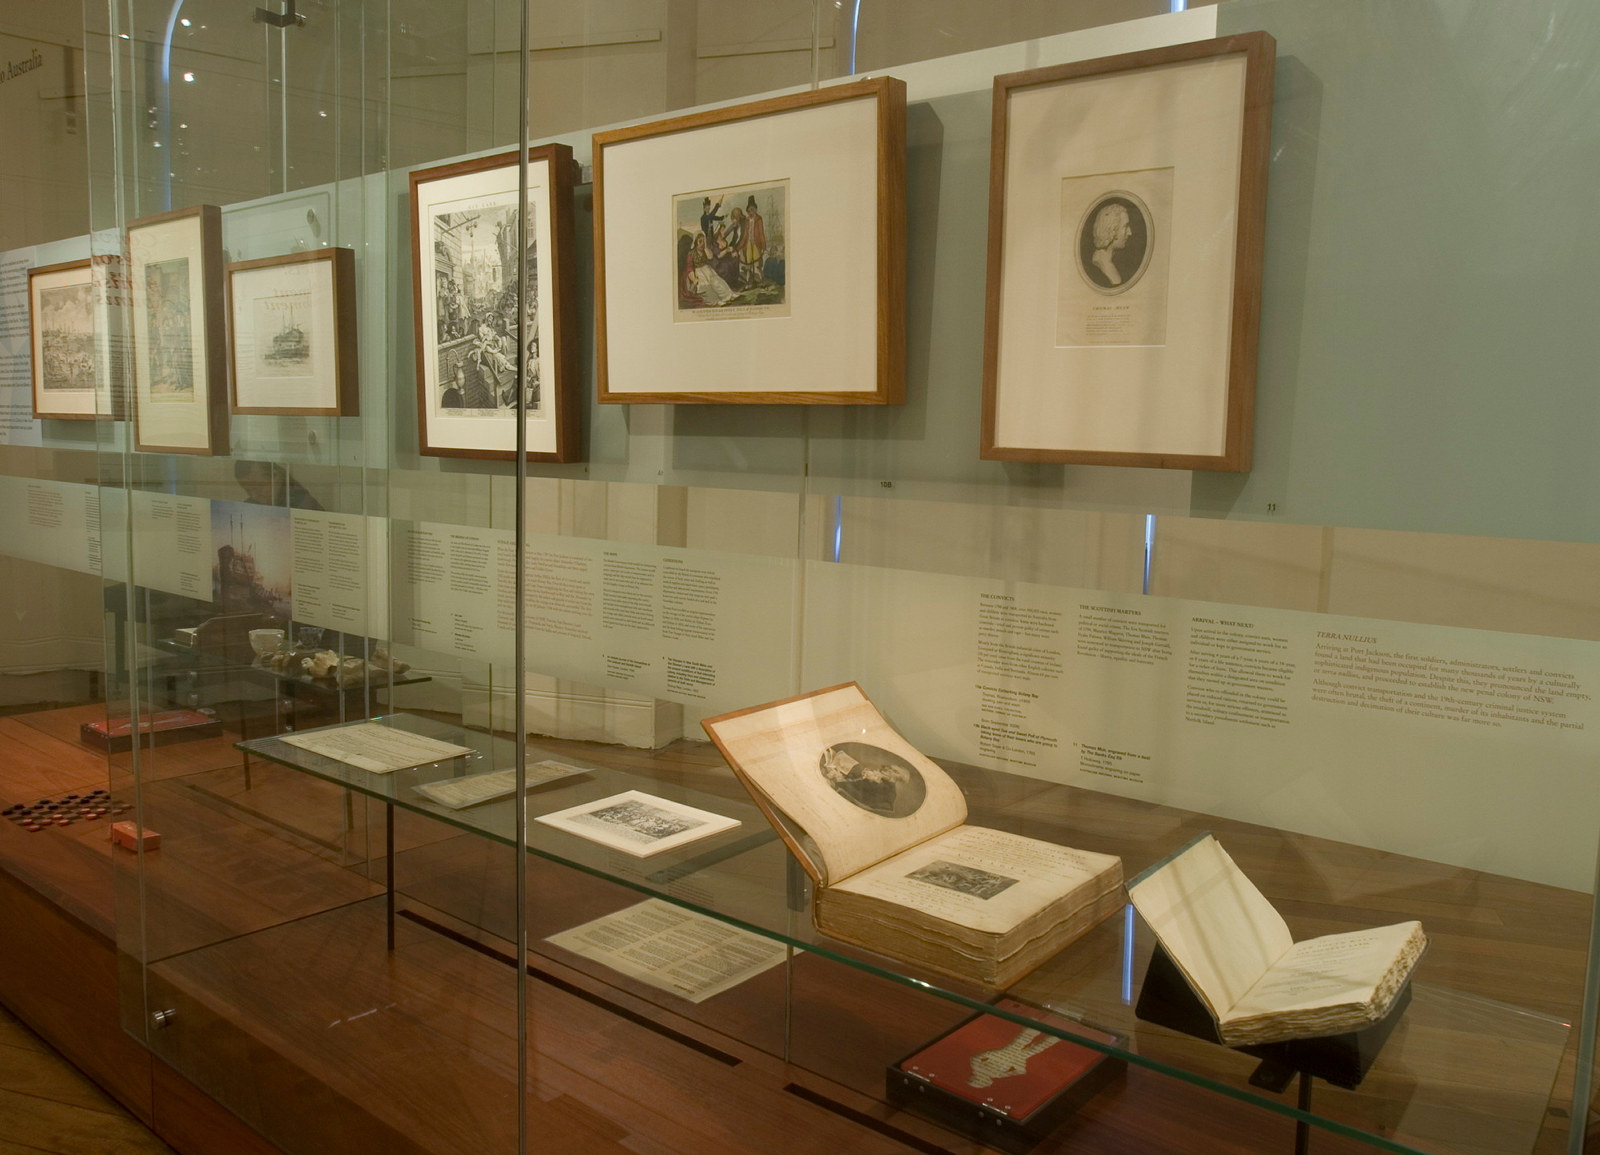 Documentation of Convicts: sites of punishment exhibition showing framed works and bound books